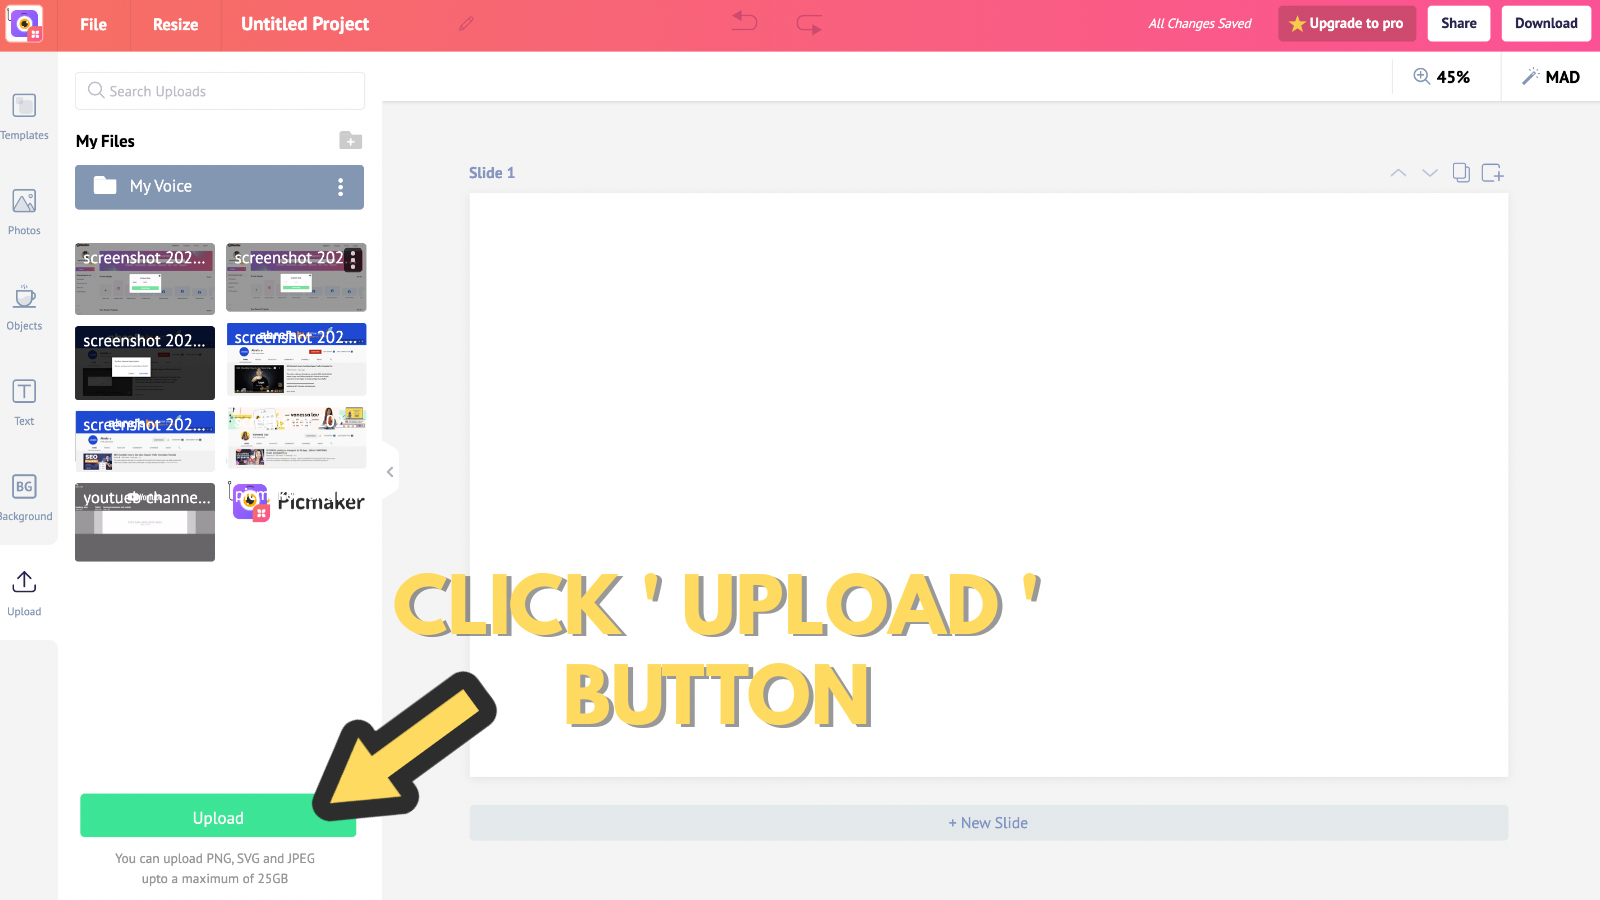 Screenshot that asks to click upload button 